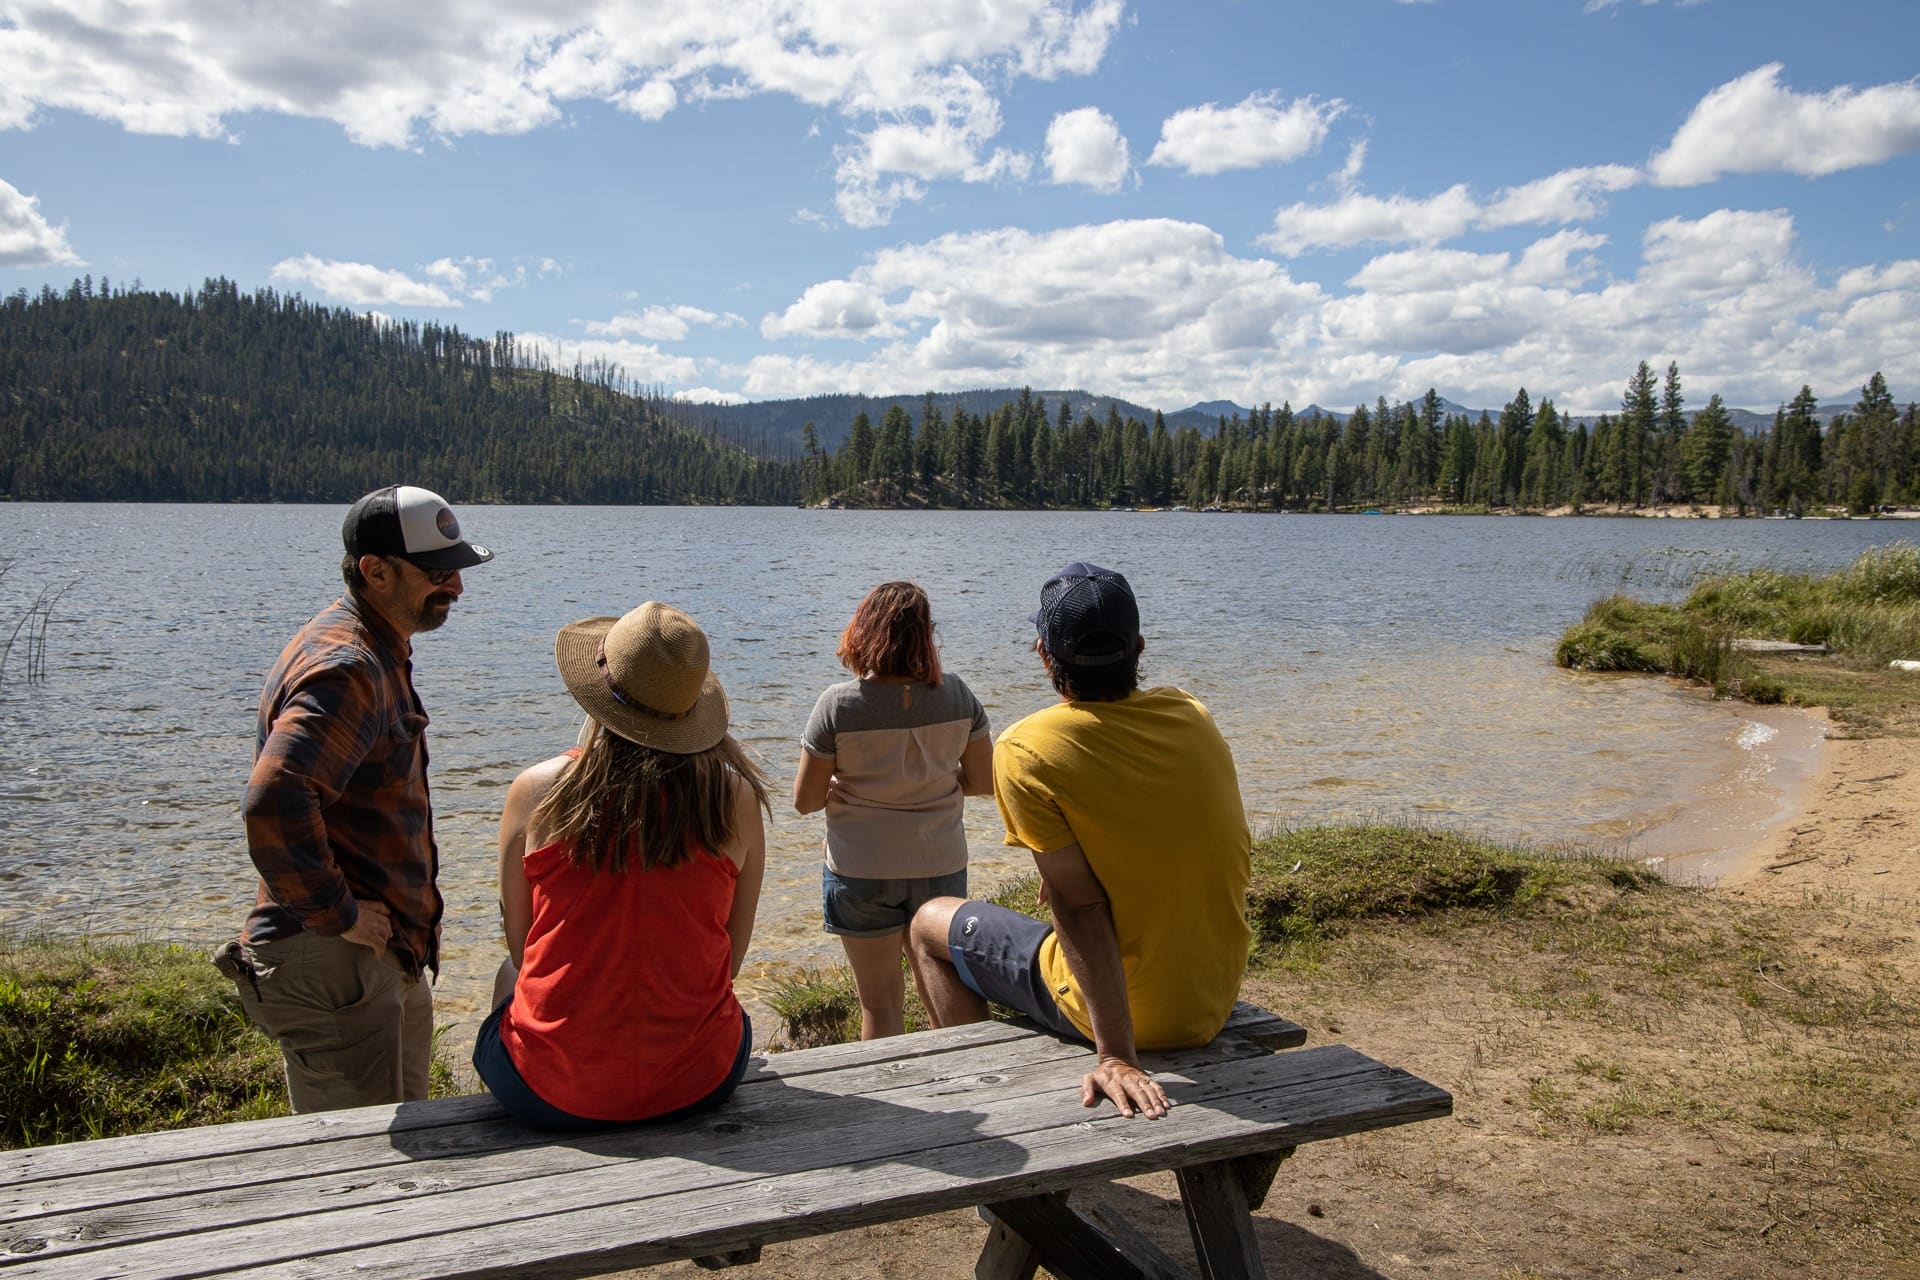 Plan a relaxing getaway to a cozy cabin at Cascade Idaho's Warm Lake Lodge where you can paddle board, boat, birdwatch, soak in hot springs & more.